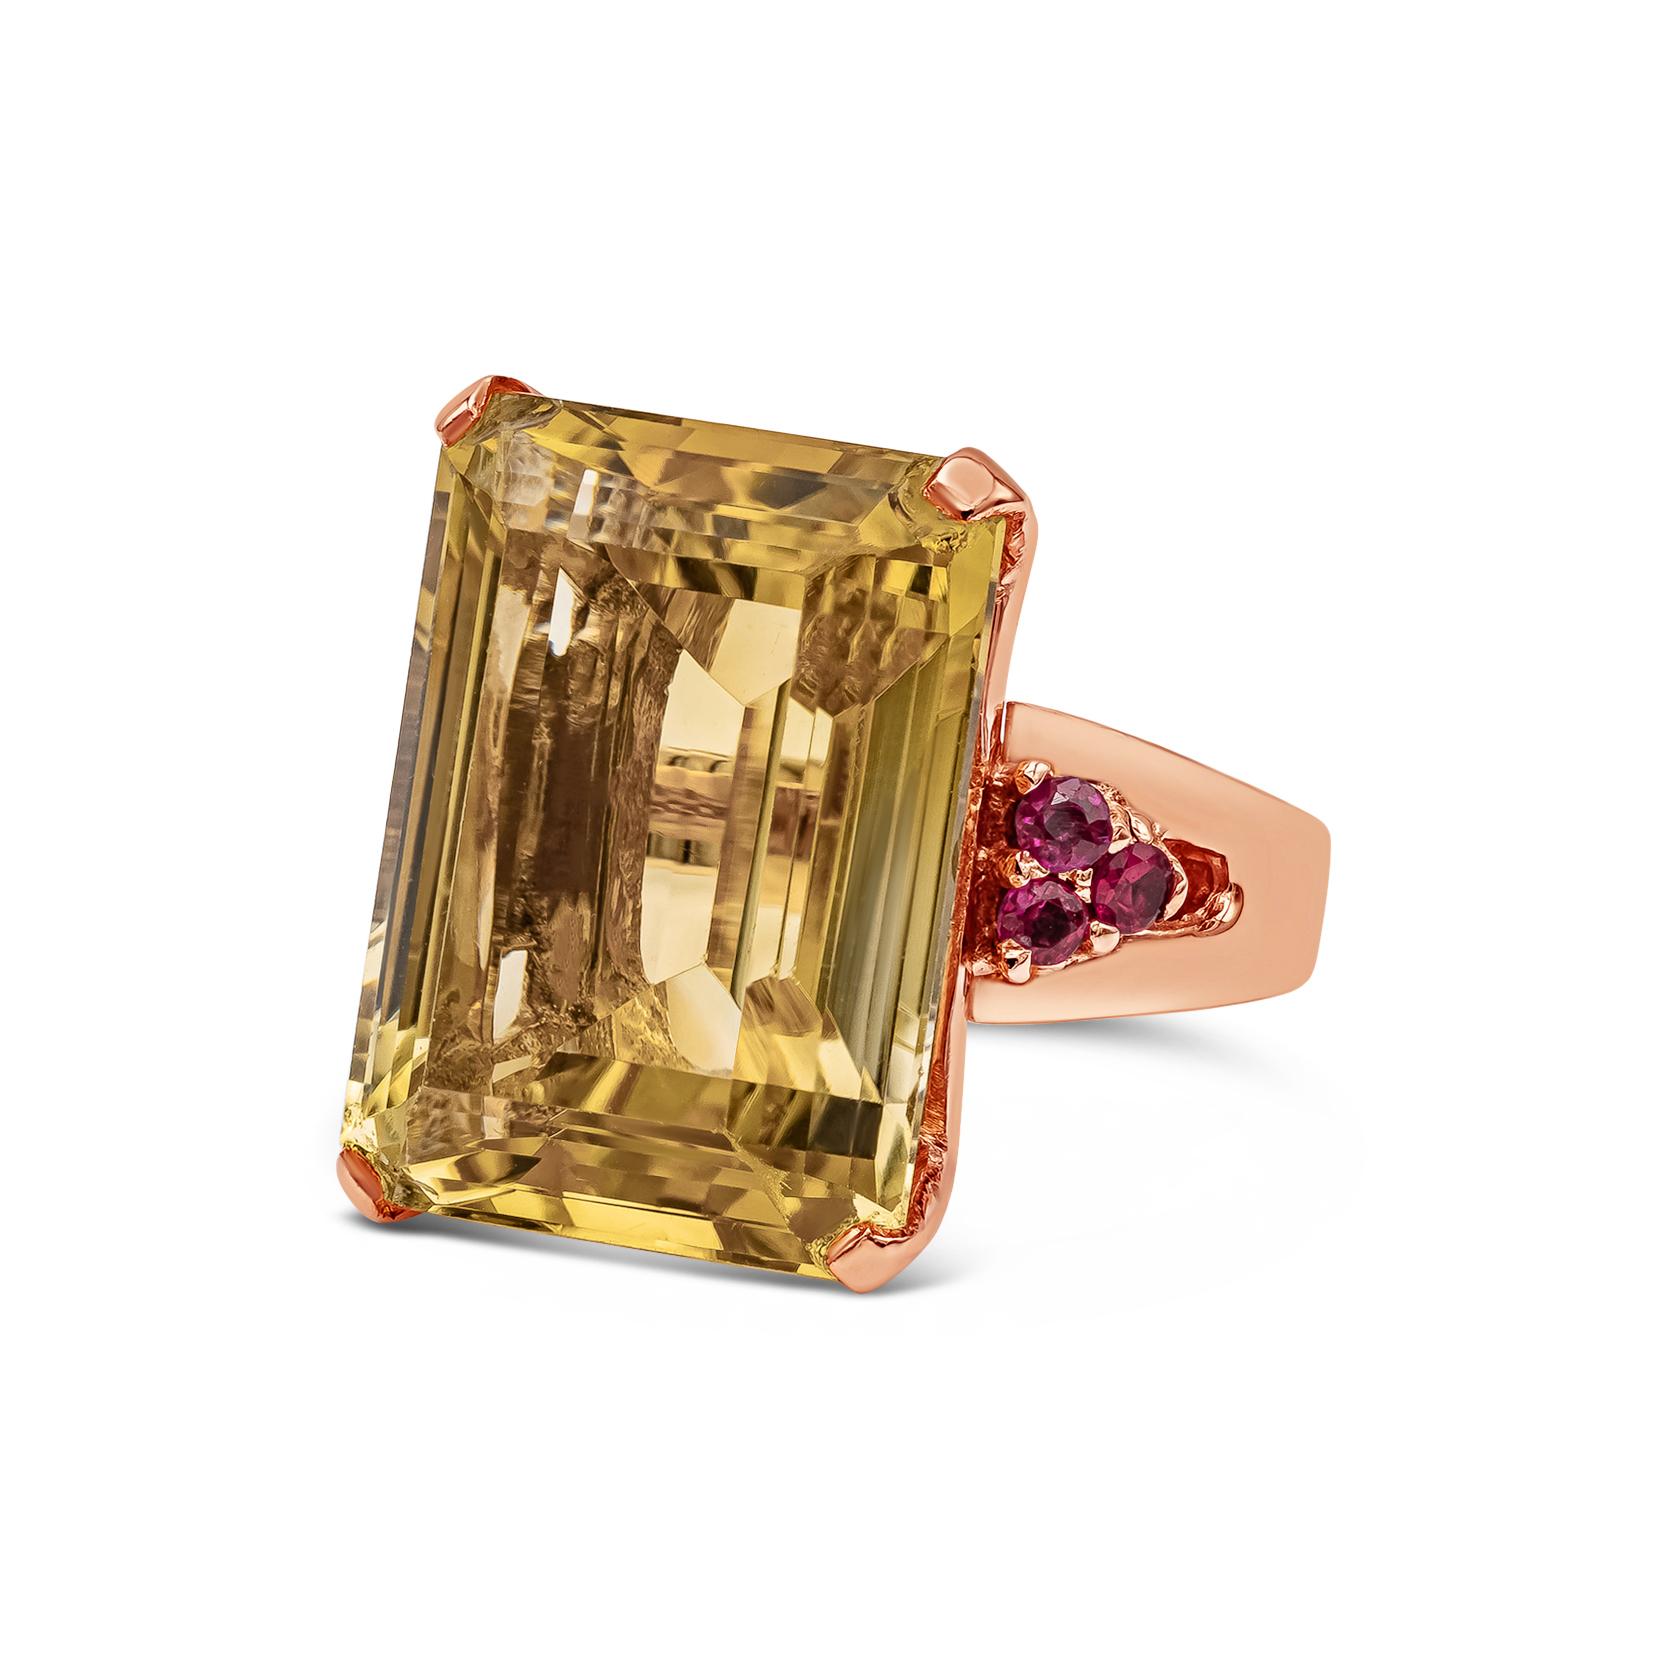 Showcasing an elegant and beautiful cocktail ring set with wonderful 23.62 carats emerald cut golden citrine, set in a classic four prong setting. Encrusted with brilliant ruby on each side weighing 0.30 carats total. Perfectly made in 14k rose